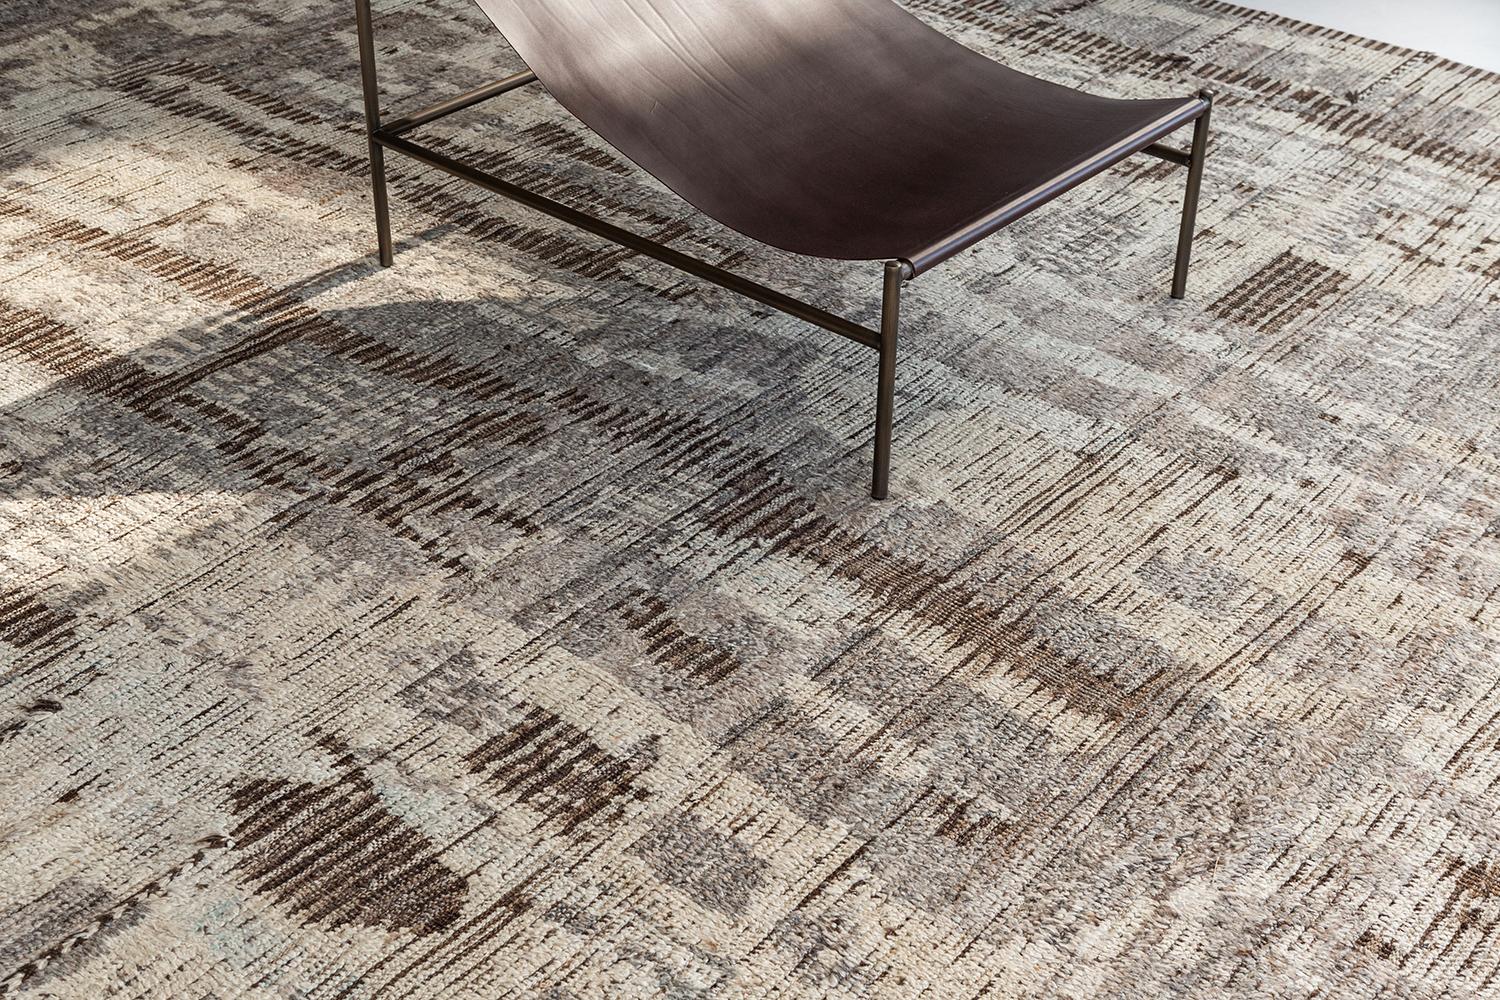 Halfah is a neutral-toned pile weave and modern-day interpretation of the Moroccan world. The rug's irregular shapes and strokes resemble the fibers of nature and their ability to be used for crafts such as cords and basketry. Designed in Los